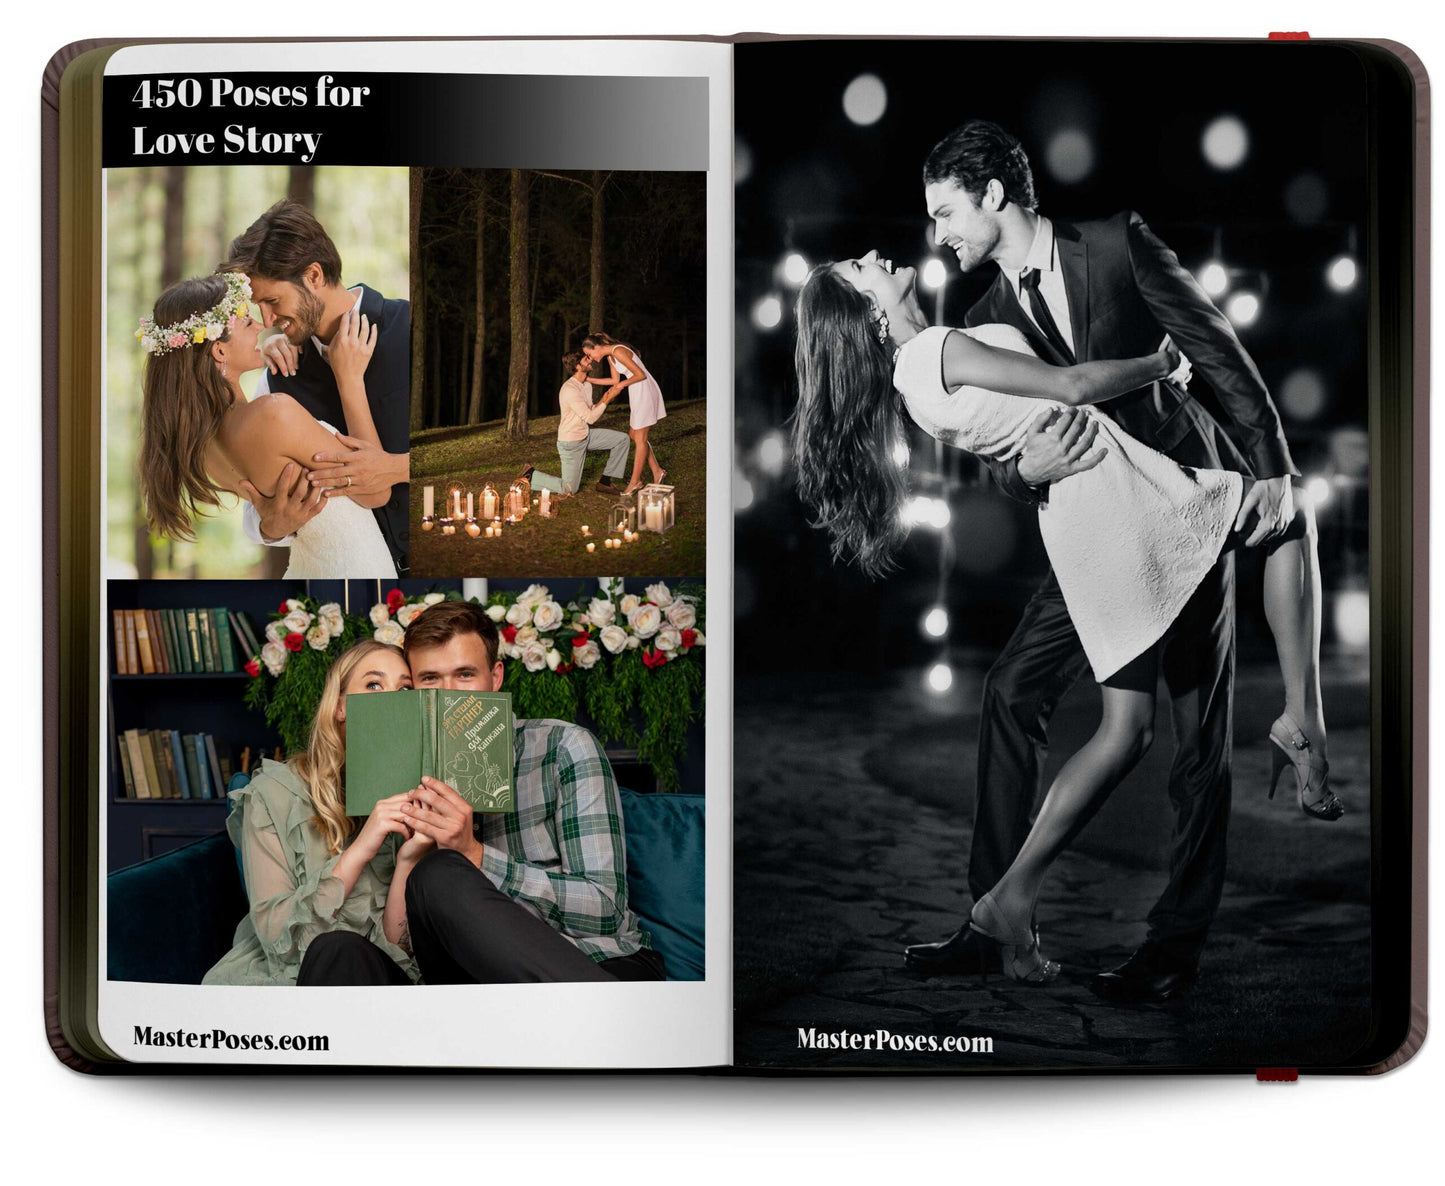 The 320 Best Poses for Couples – Digital Book